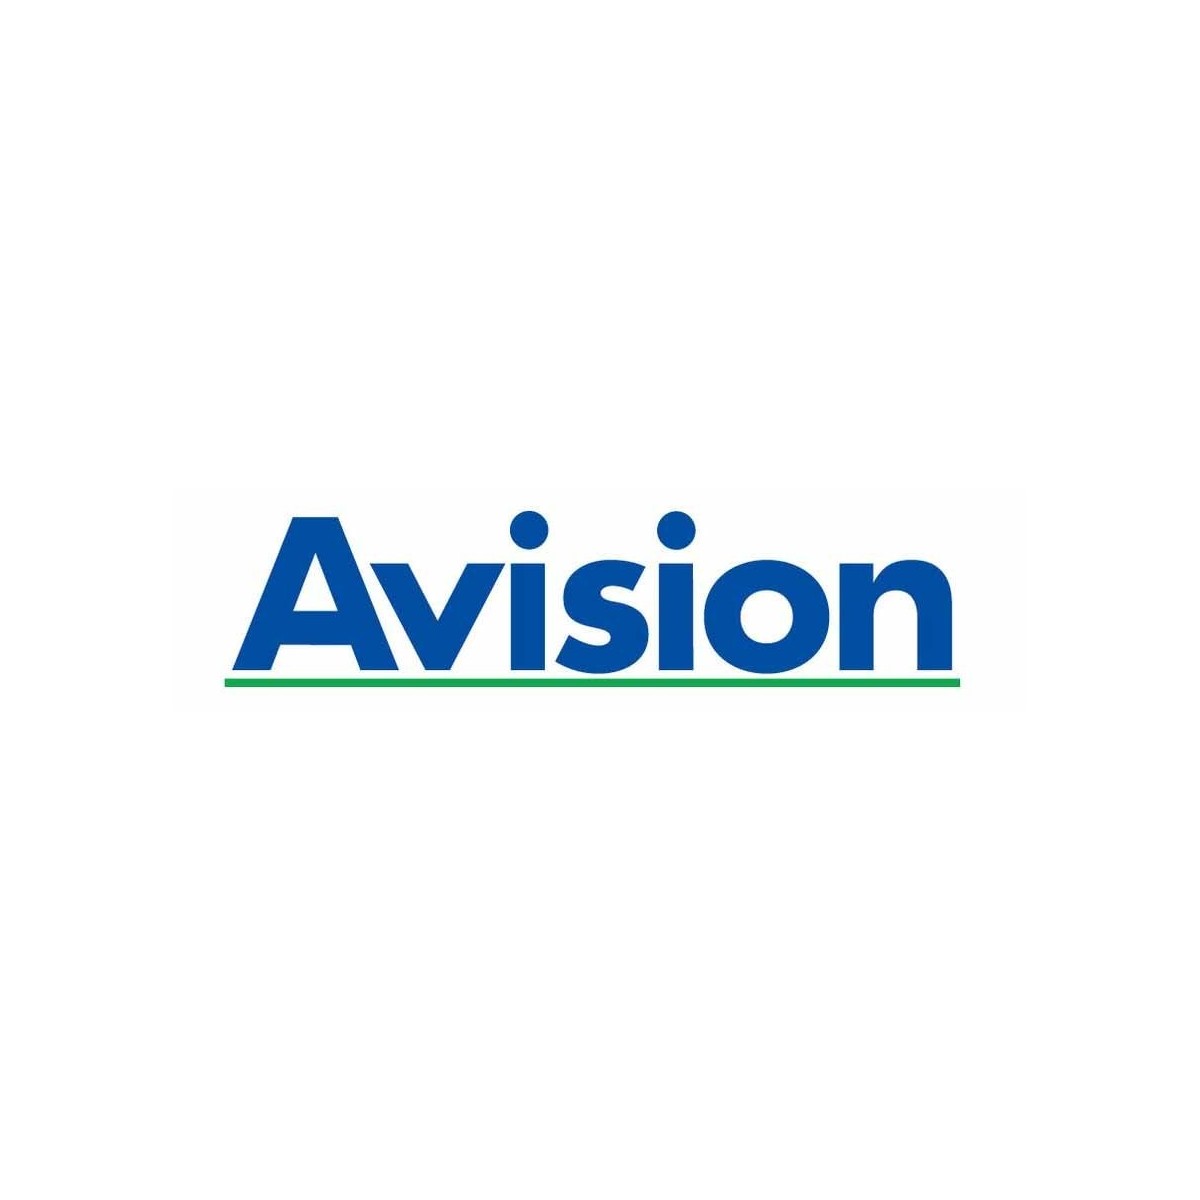 Avision AD345F A4 Dokumentenscanner - Document Scanners - A4